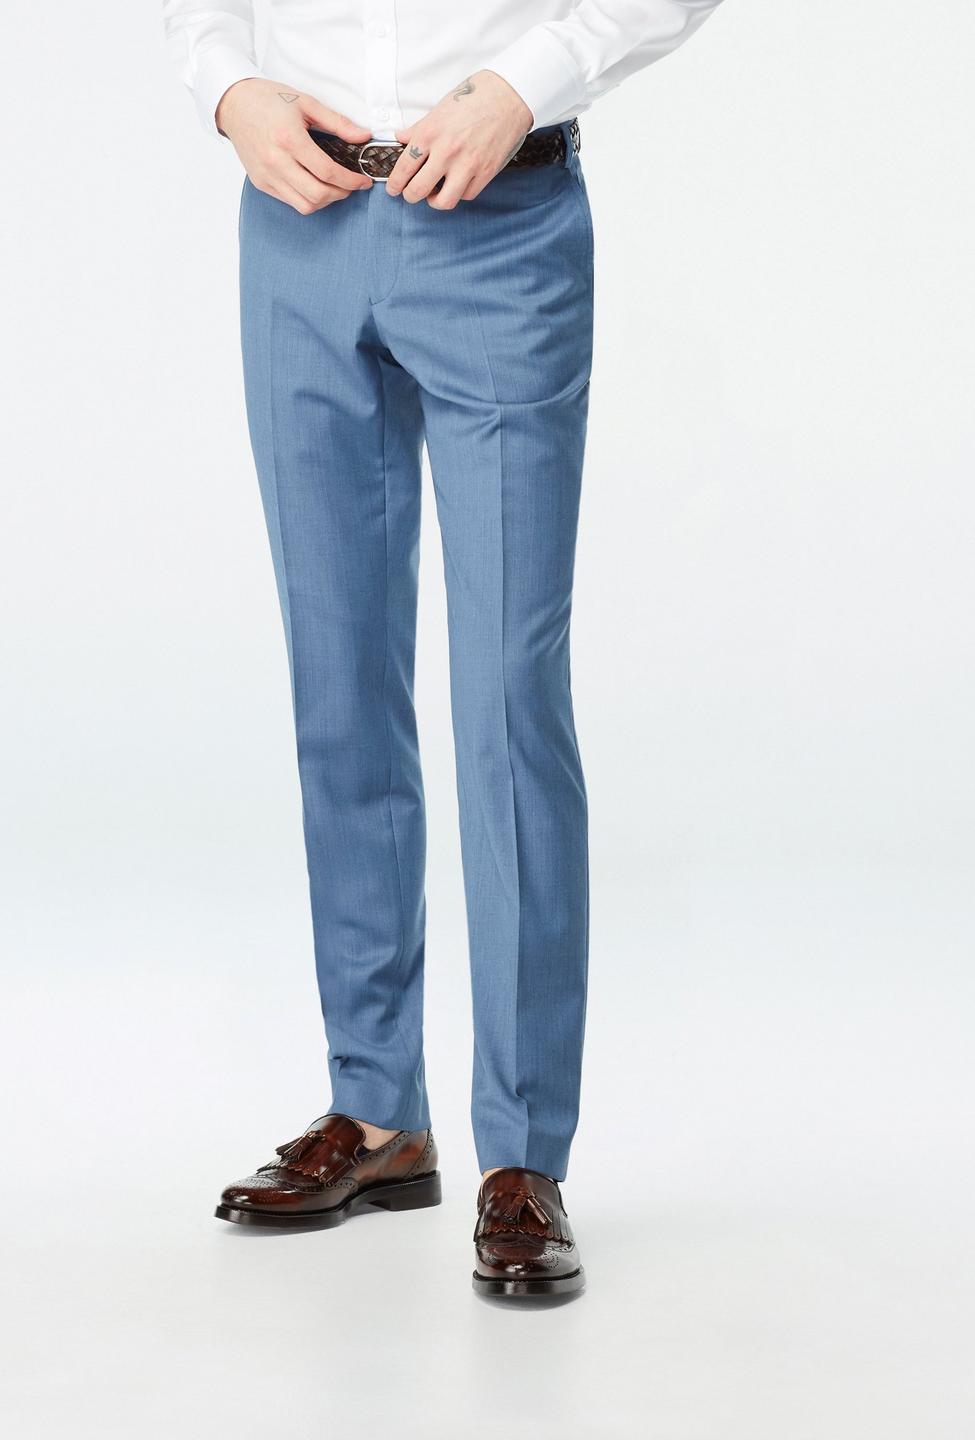 Blue pants - Hemsworth Solid Design from Premium Indochino Collection